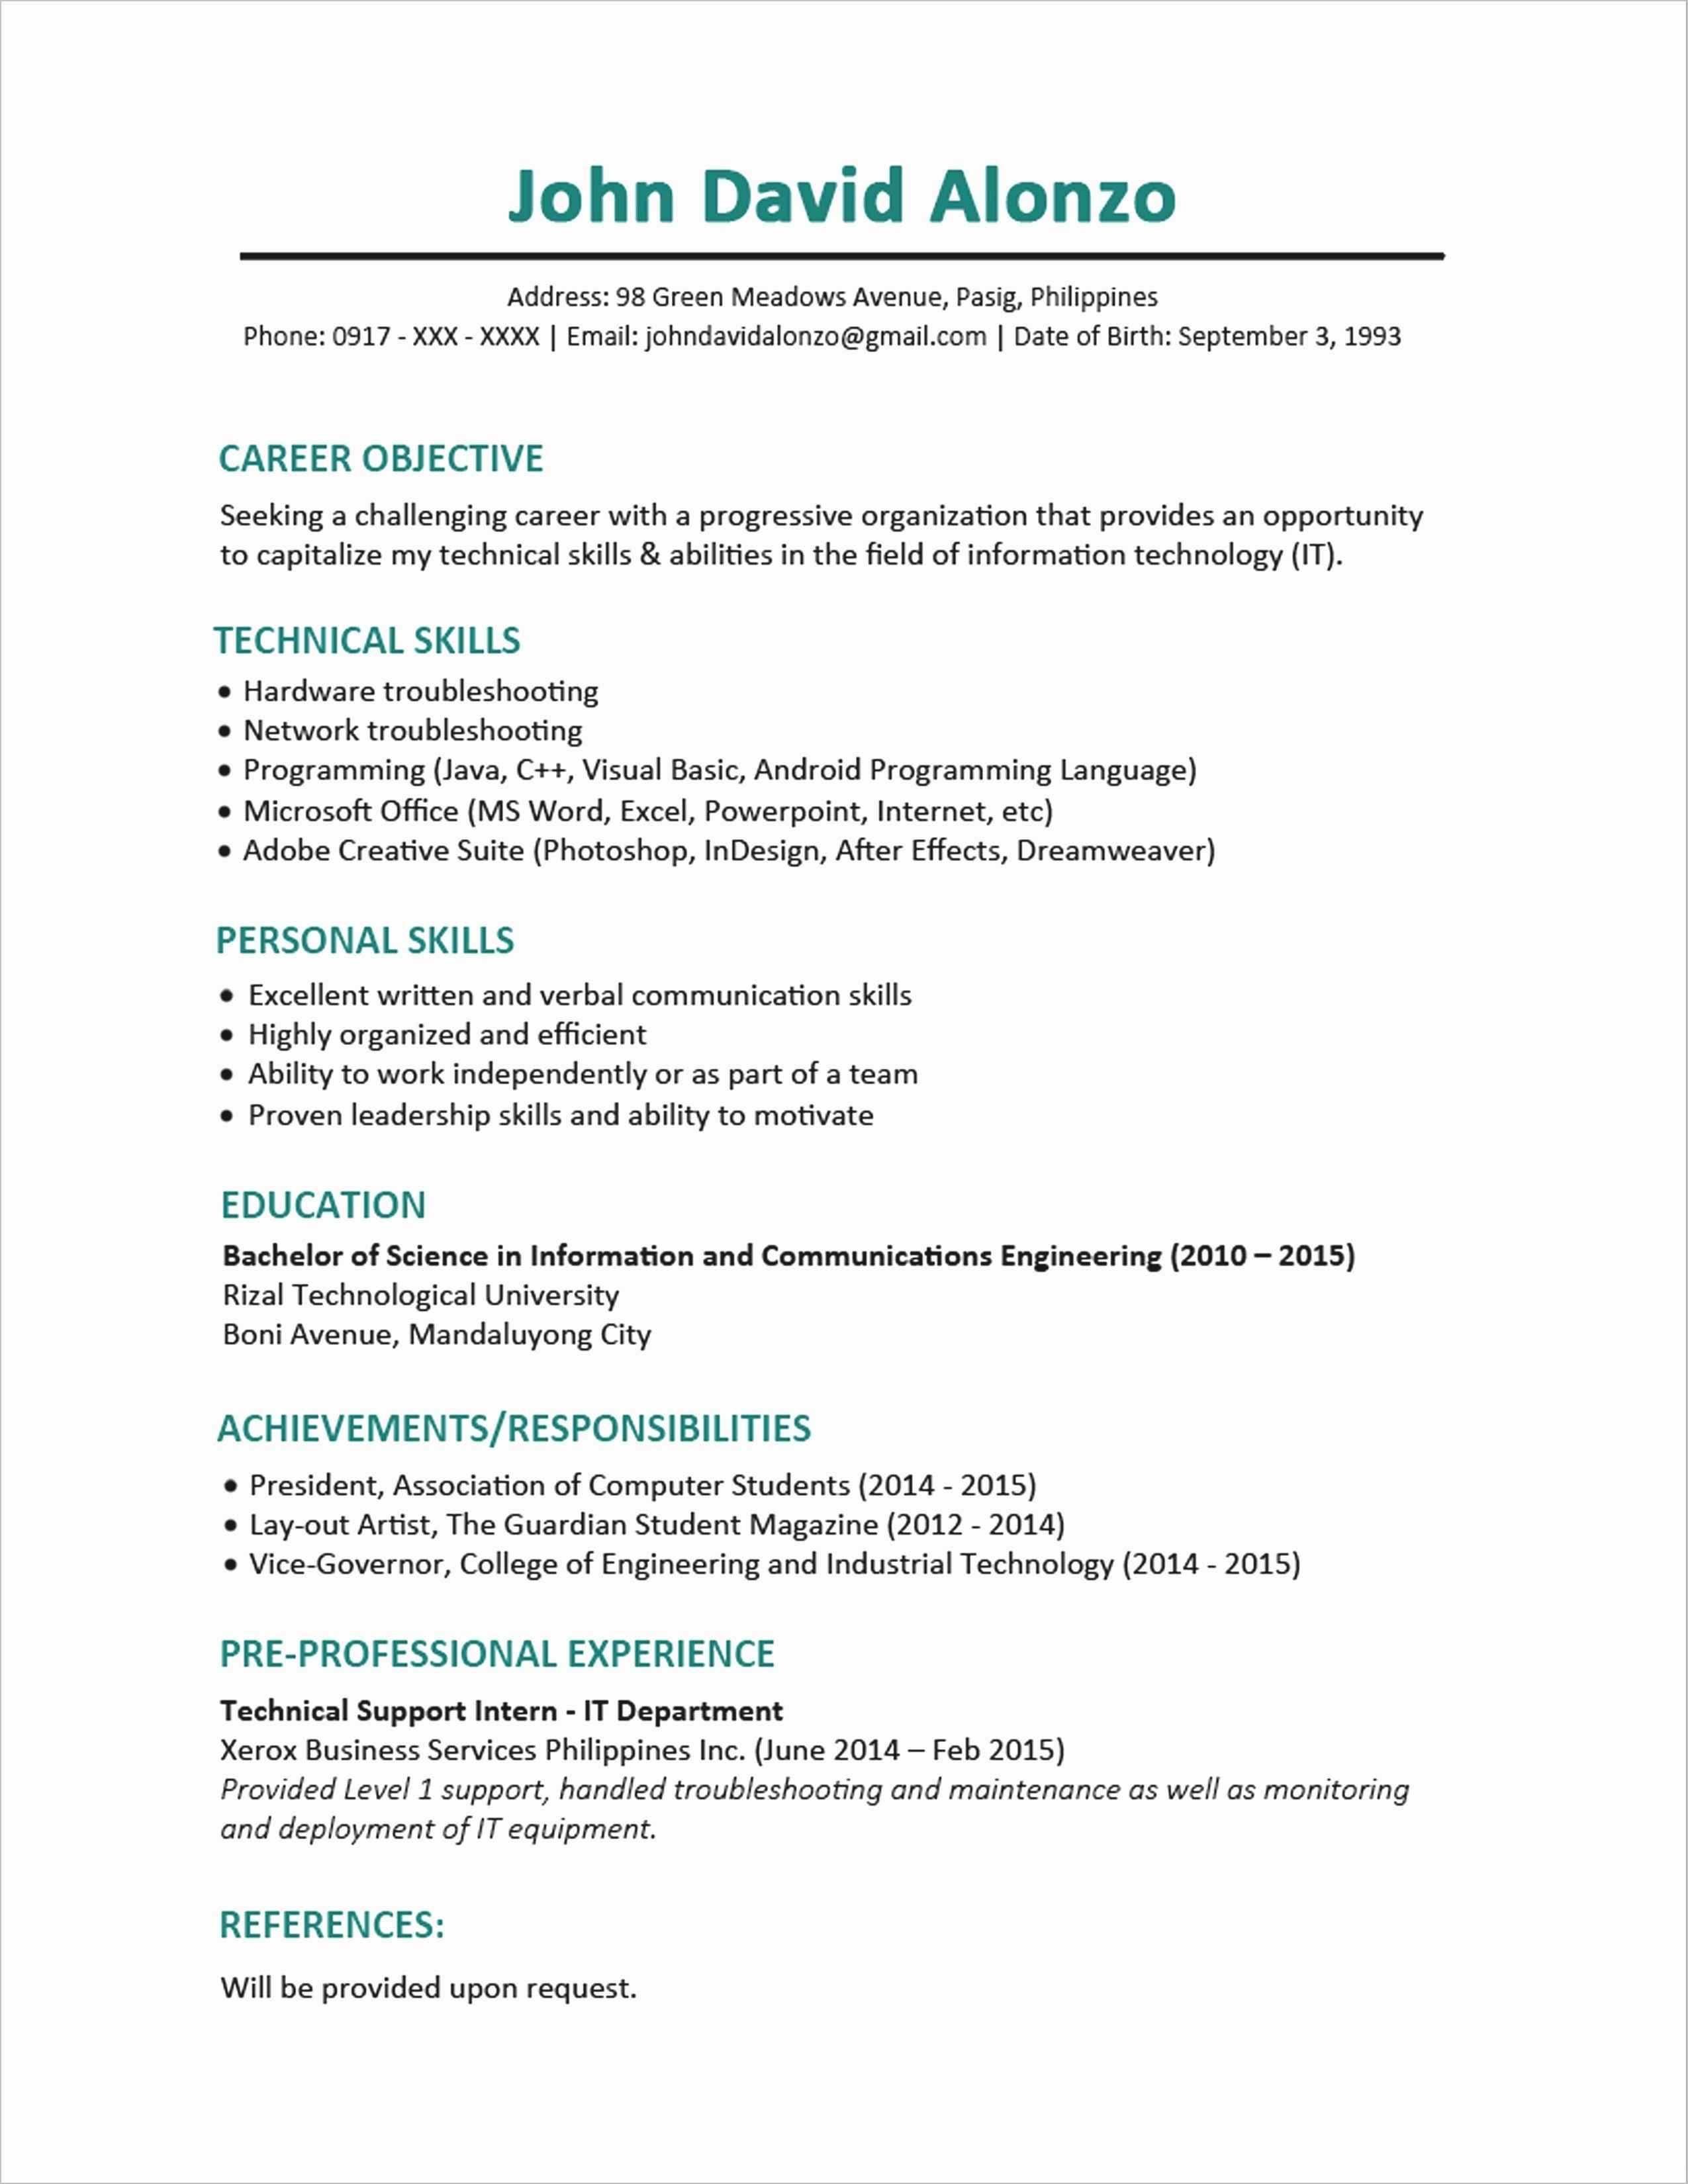 Resume Template Creative Free Downloads Microsoft Works Templates Download